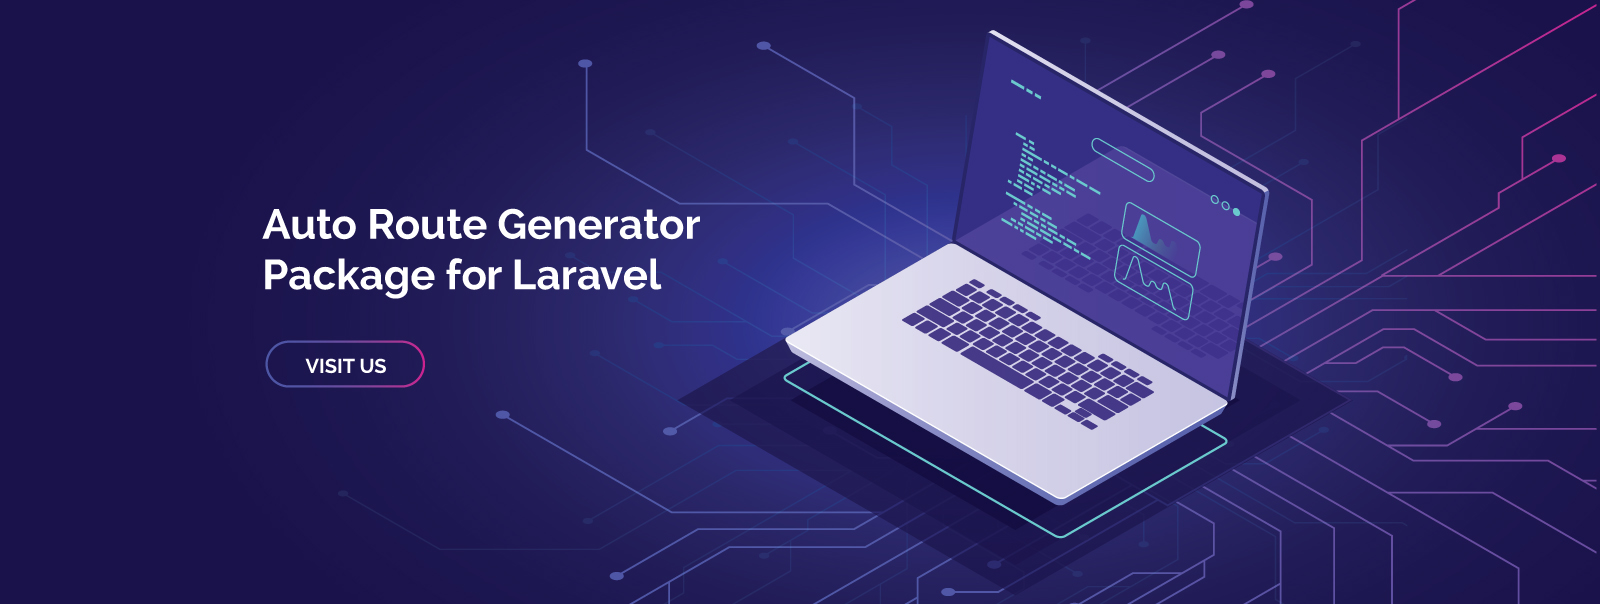 Auto Route Generator Package for Laravel